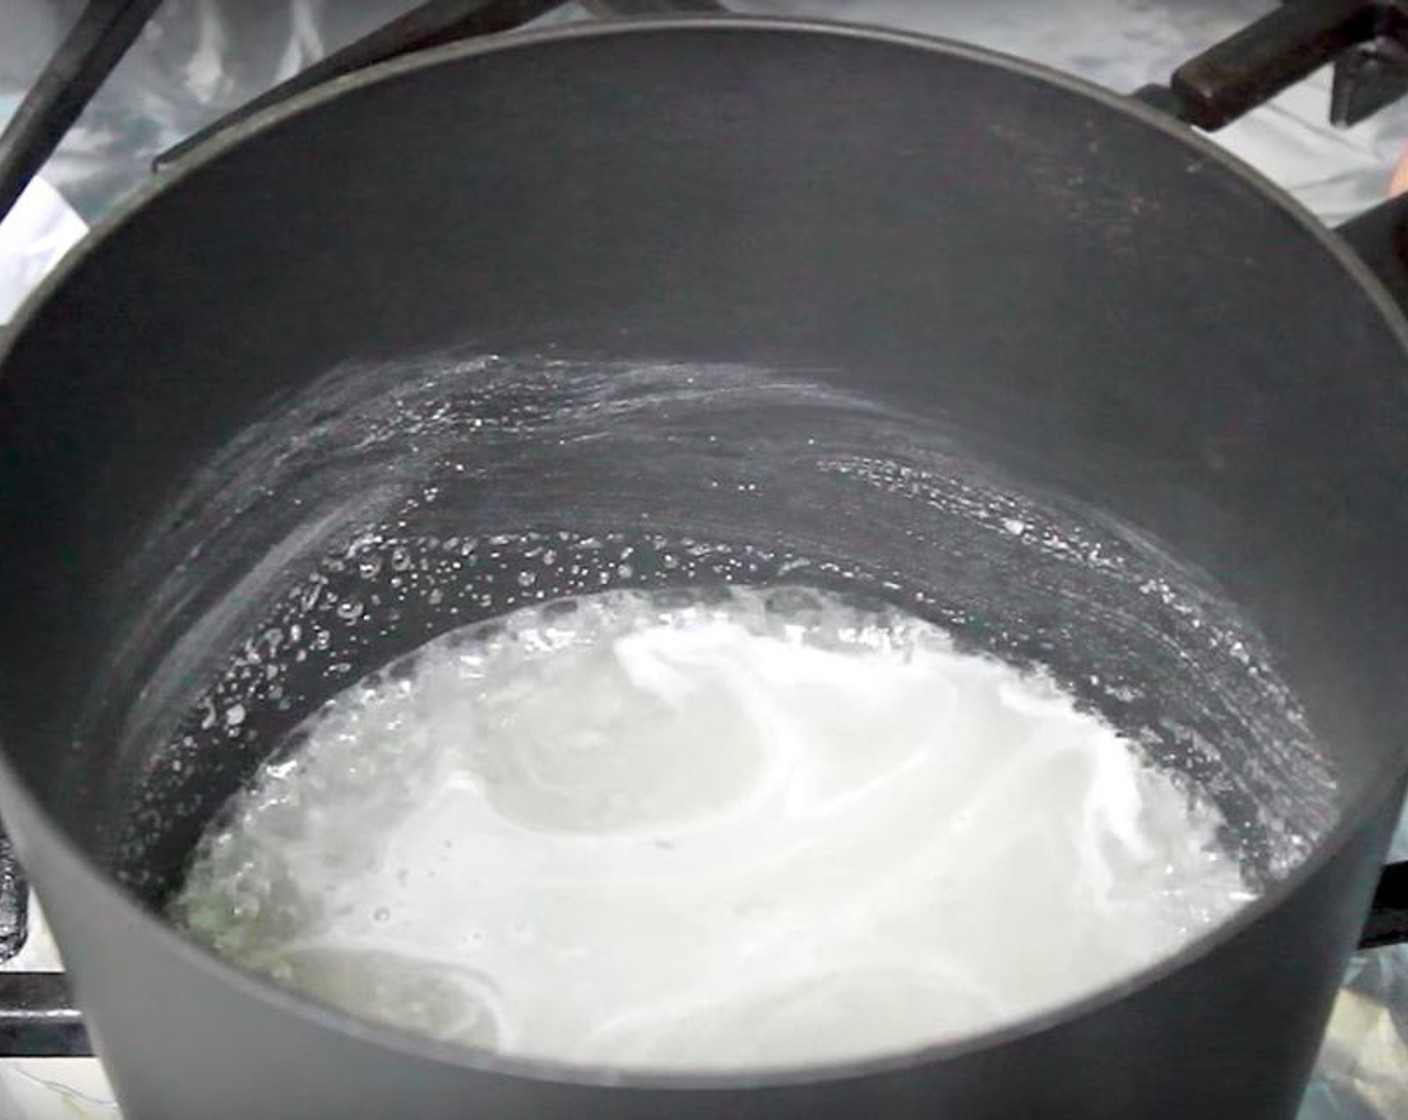 step 1 In a heavy bottom sauce pan over high heat, add Granulated Sugar (1 cup) and Water (1/3 cup). Swirl the pan until the Granulated Sugar and Water are mixed together. Allow the sugar to dissolve.